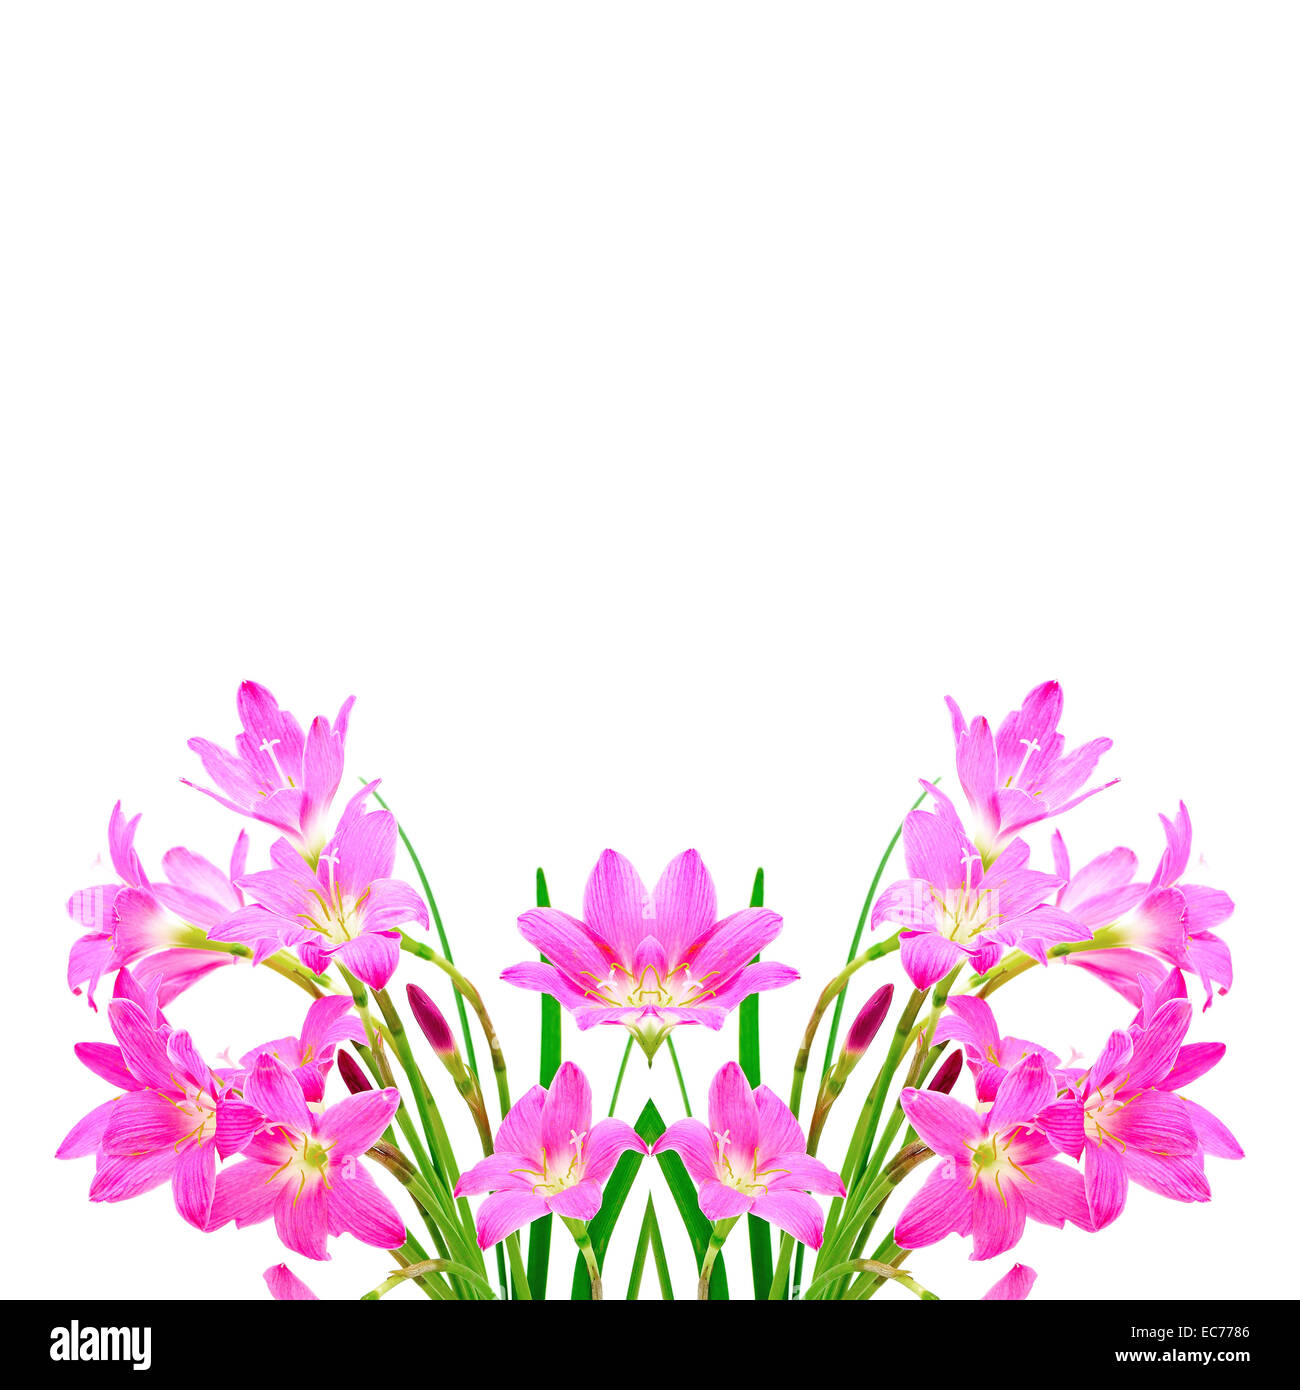 Tropical pink ground flower, Zephyranthes Lily, Rain Lily, Fairy Lily or Little Witches, isolated on a white background Stock Photo